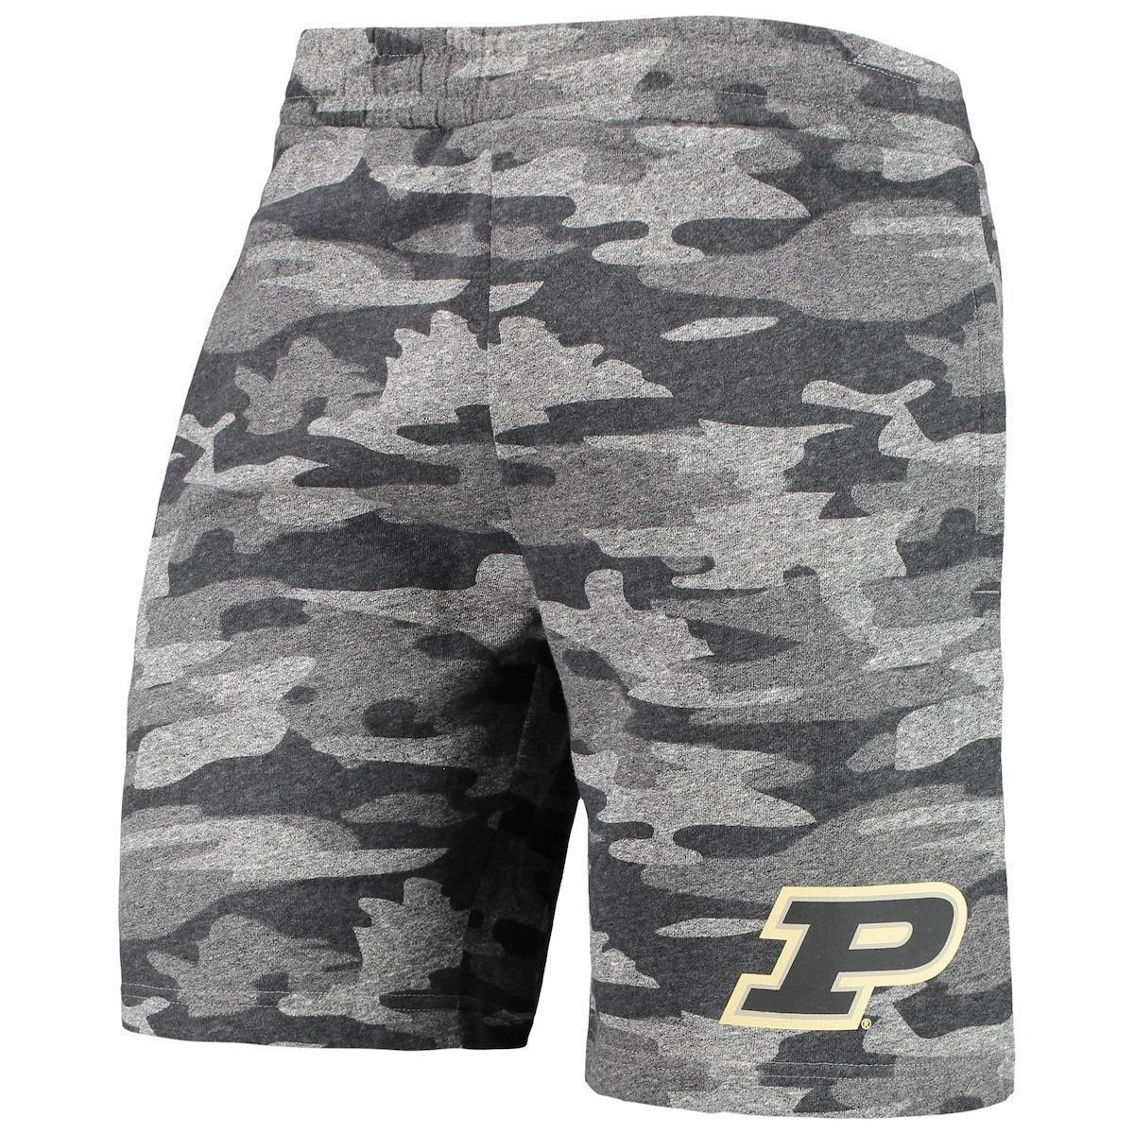 Concepts Sport Men's Charcoal/Gray Purdue Boilermakers Camo Backup Terry Jam Lounge Shorts - Image 3 of 4